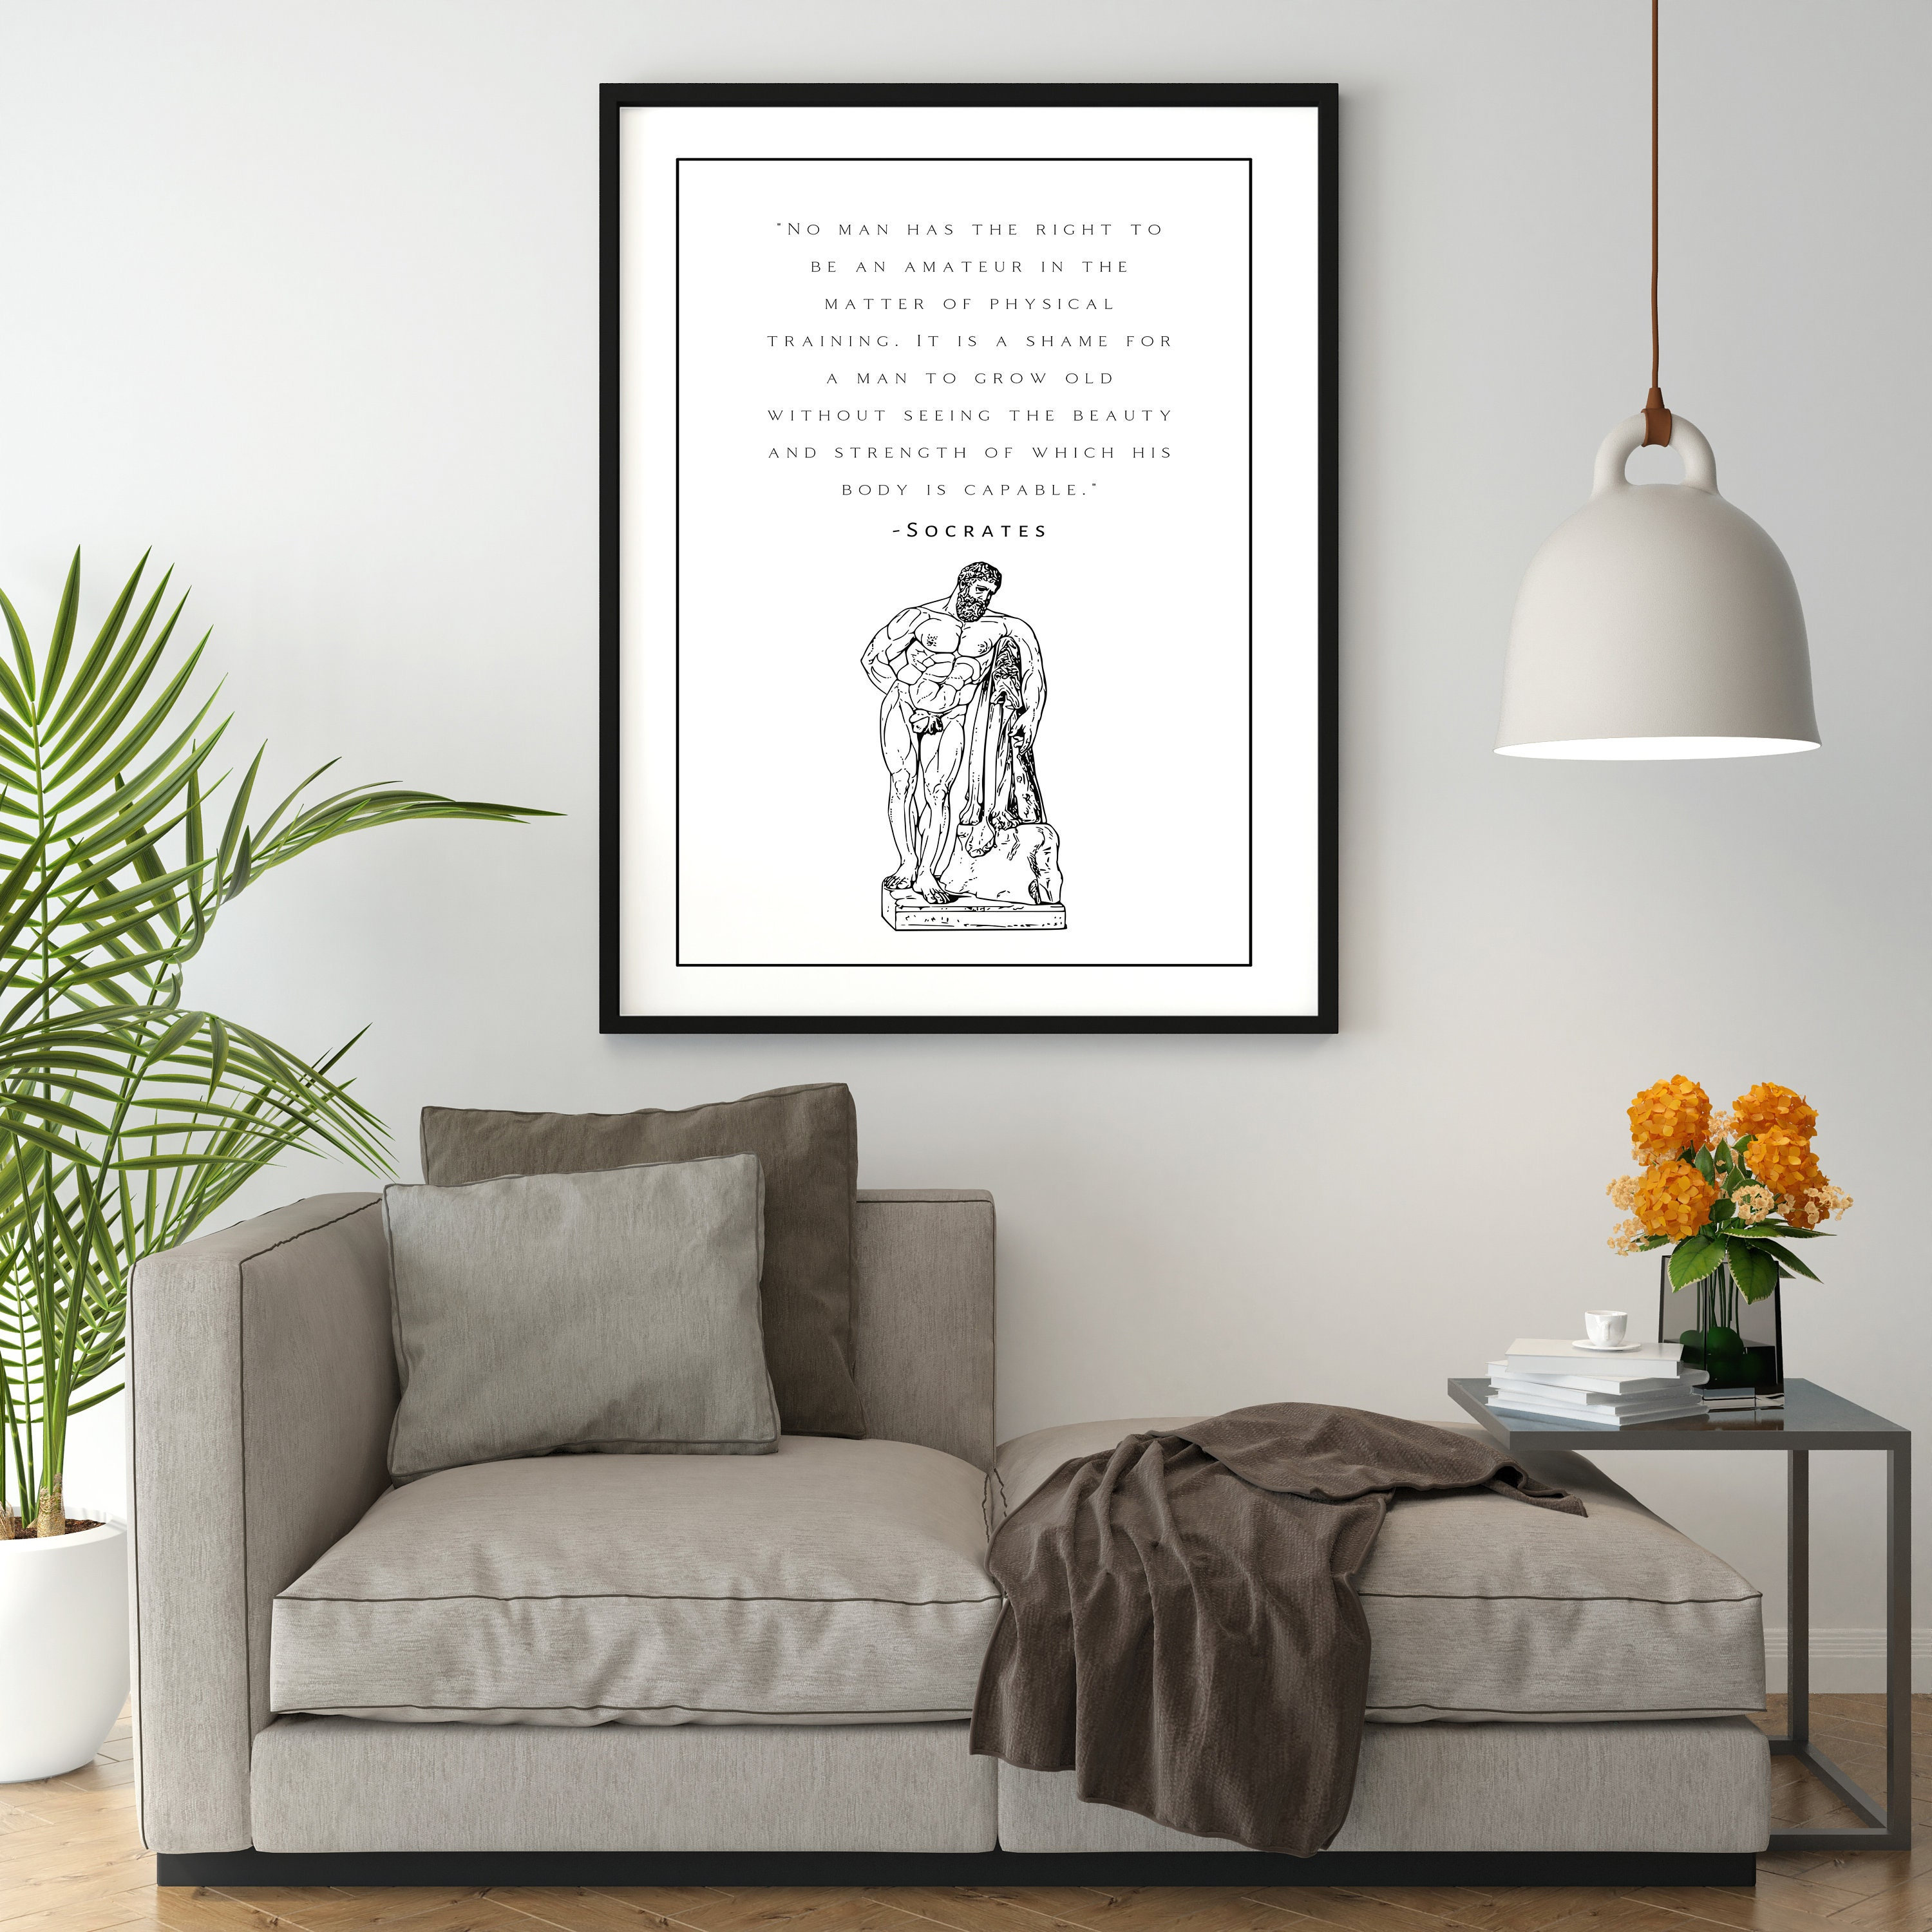 Socrates Poem Posters Motivational Quote Art Print Poetry pic image